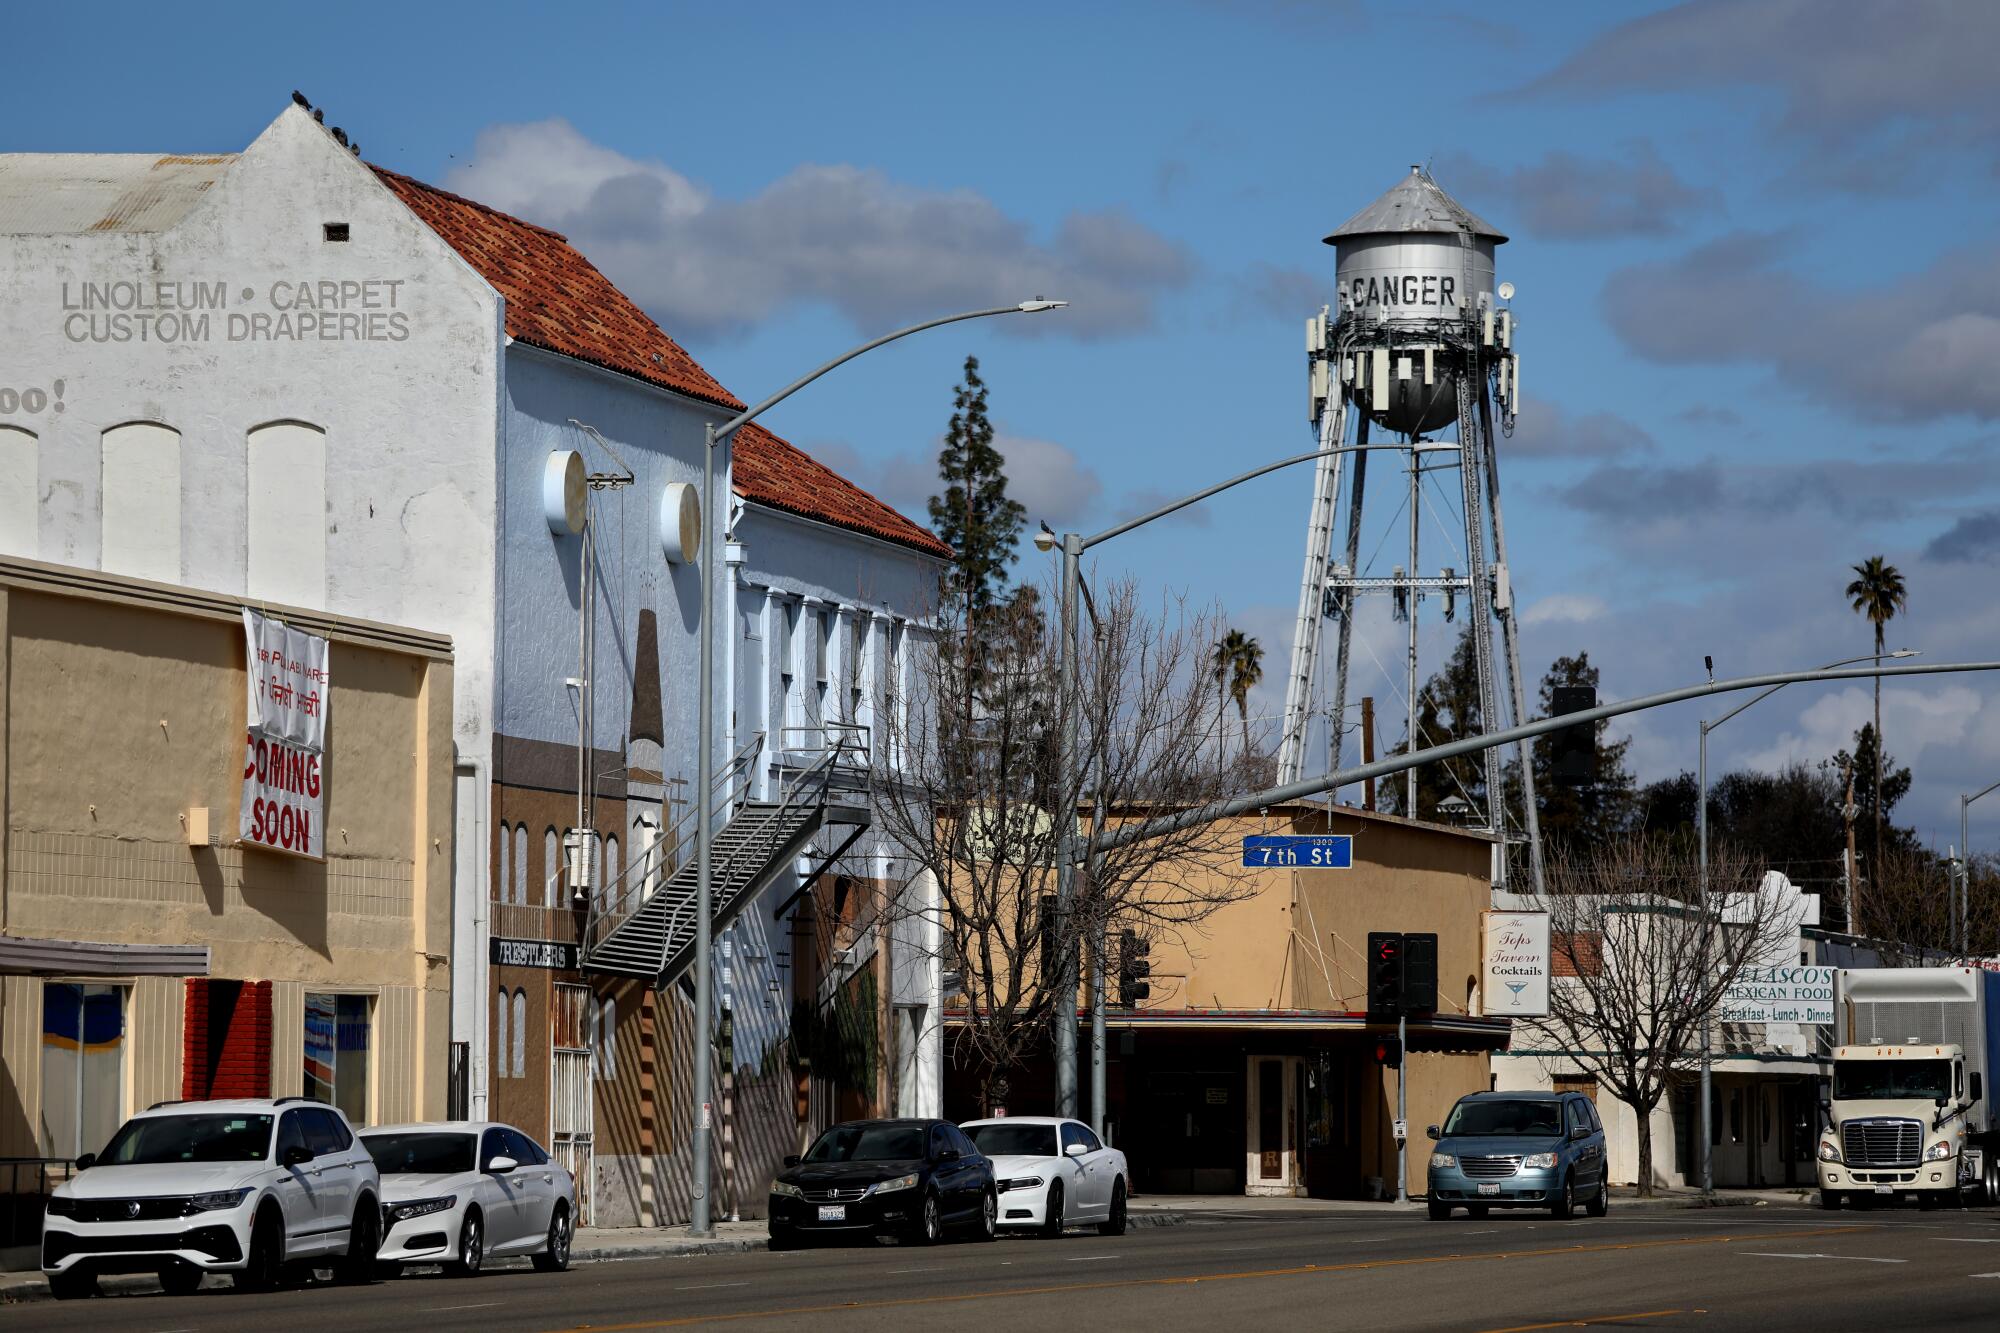 A water tower stands over downtown Sanger.